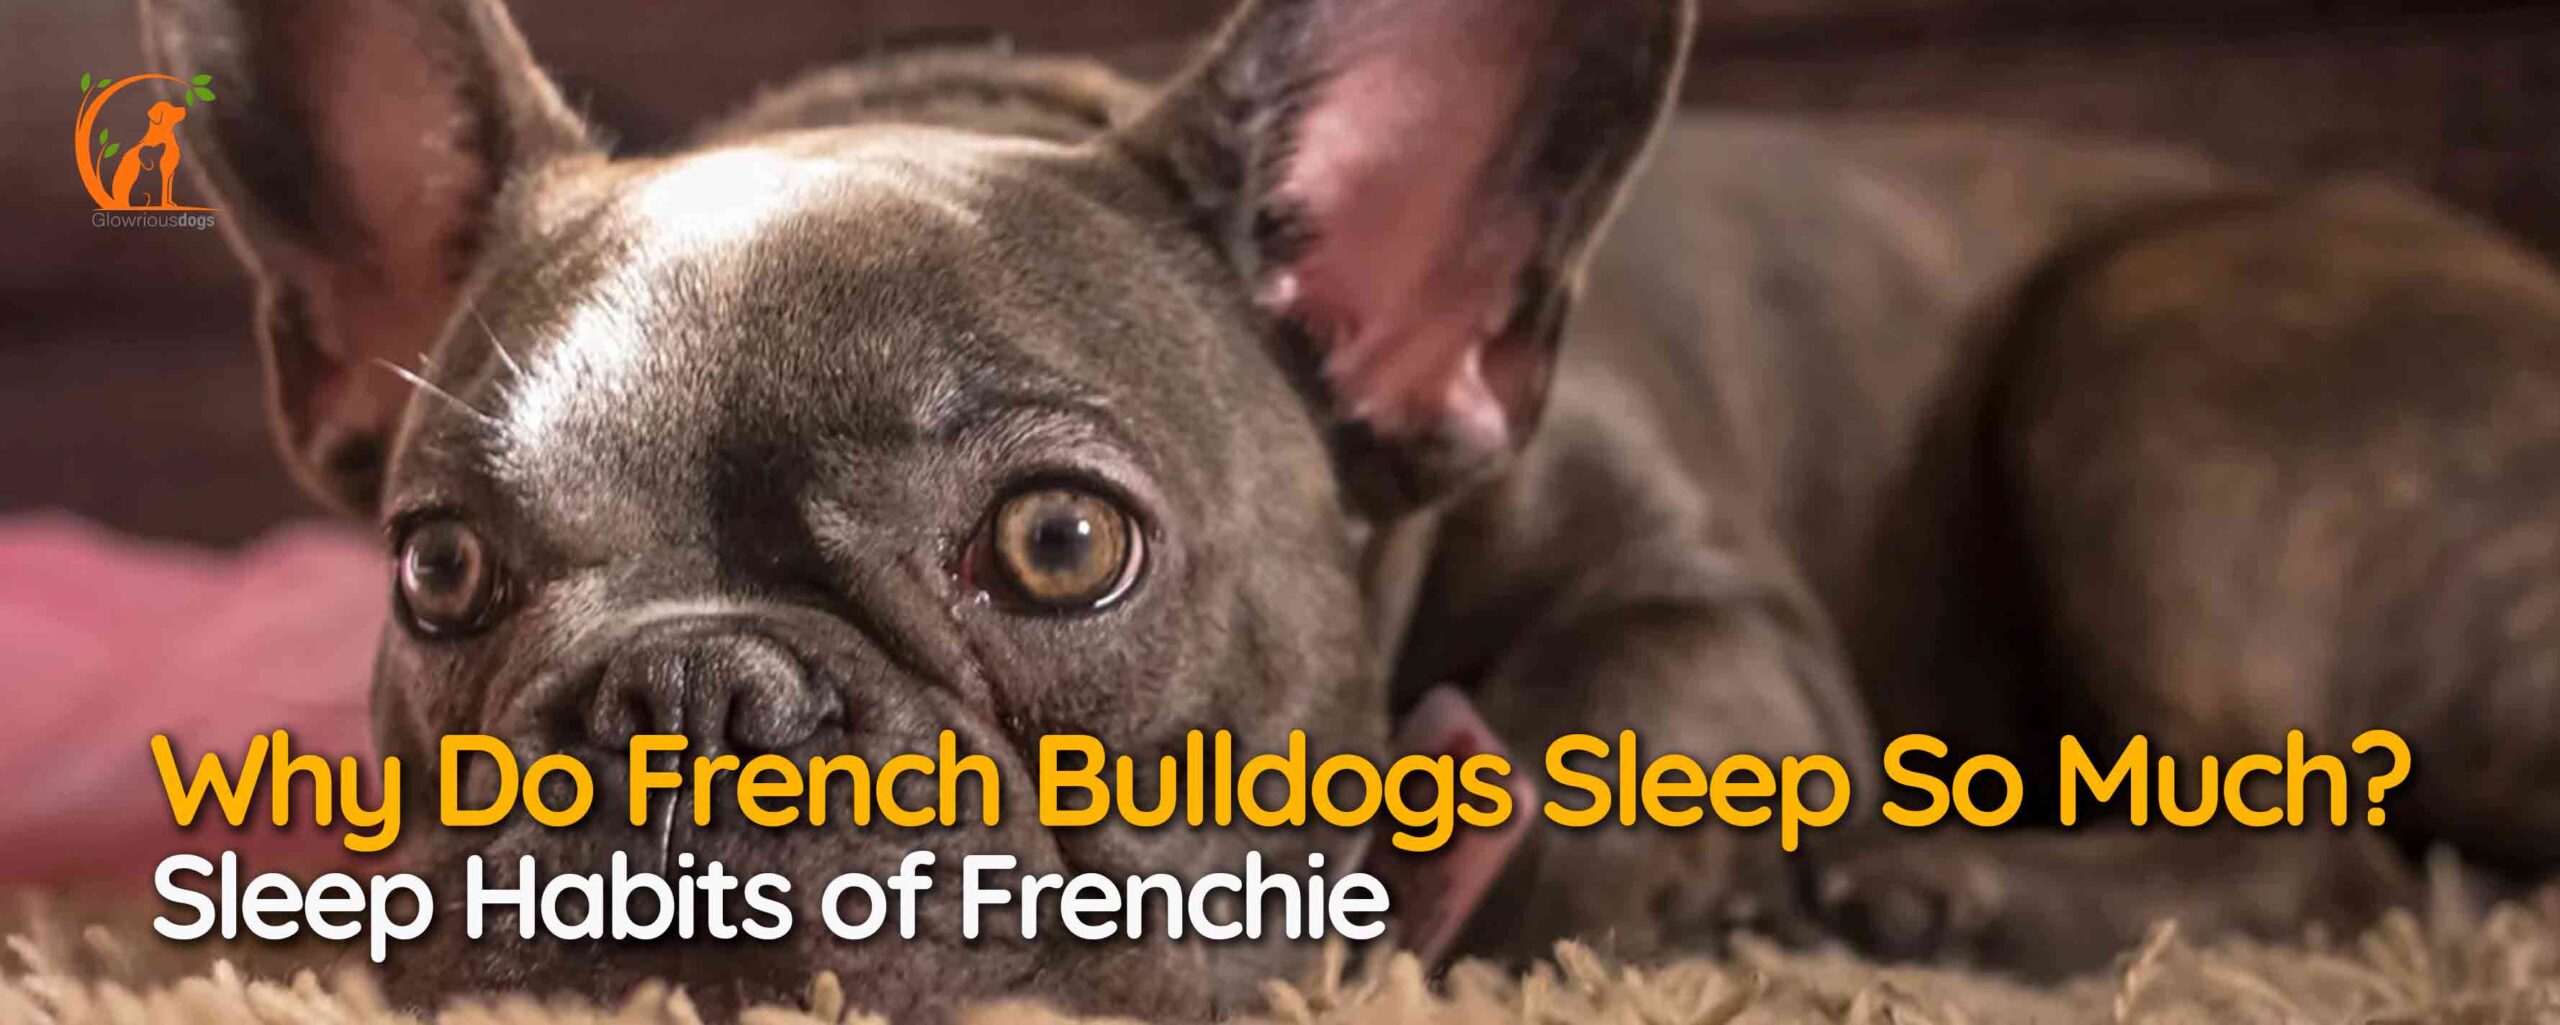 Why Do French Bulldogs Sleep So Much? Sleep Habits of Frenchie